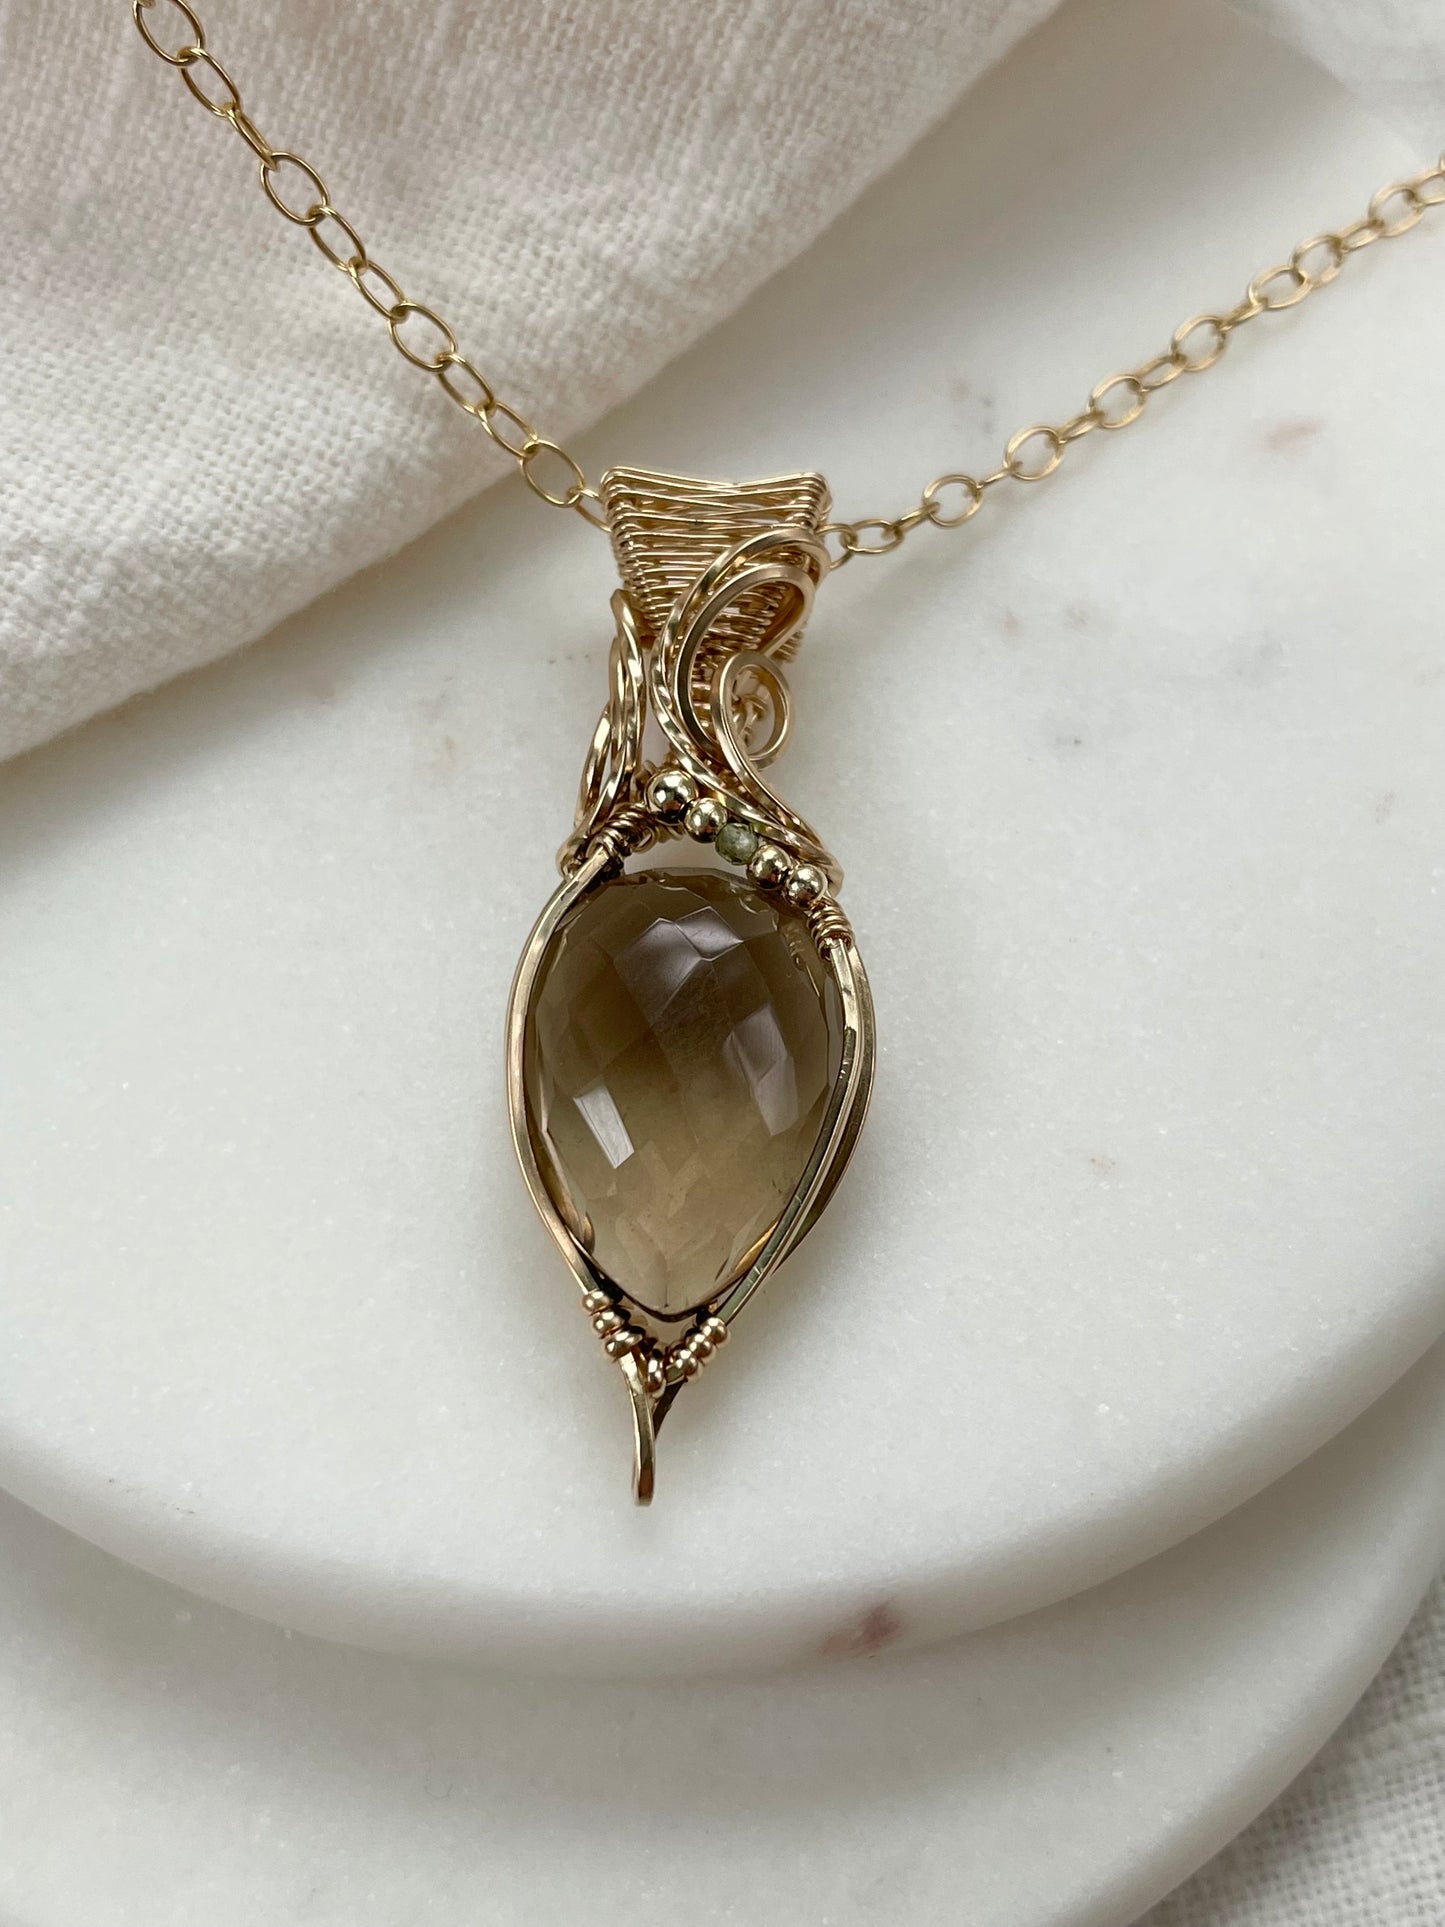 Faceted Smoky Quartz, Peridot Necklace in 14k Gold Filled